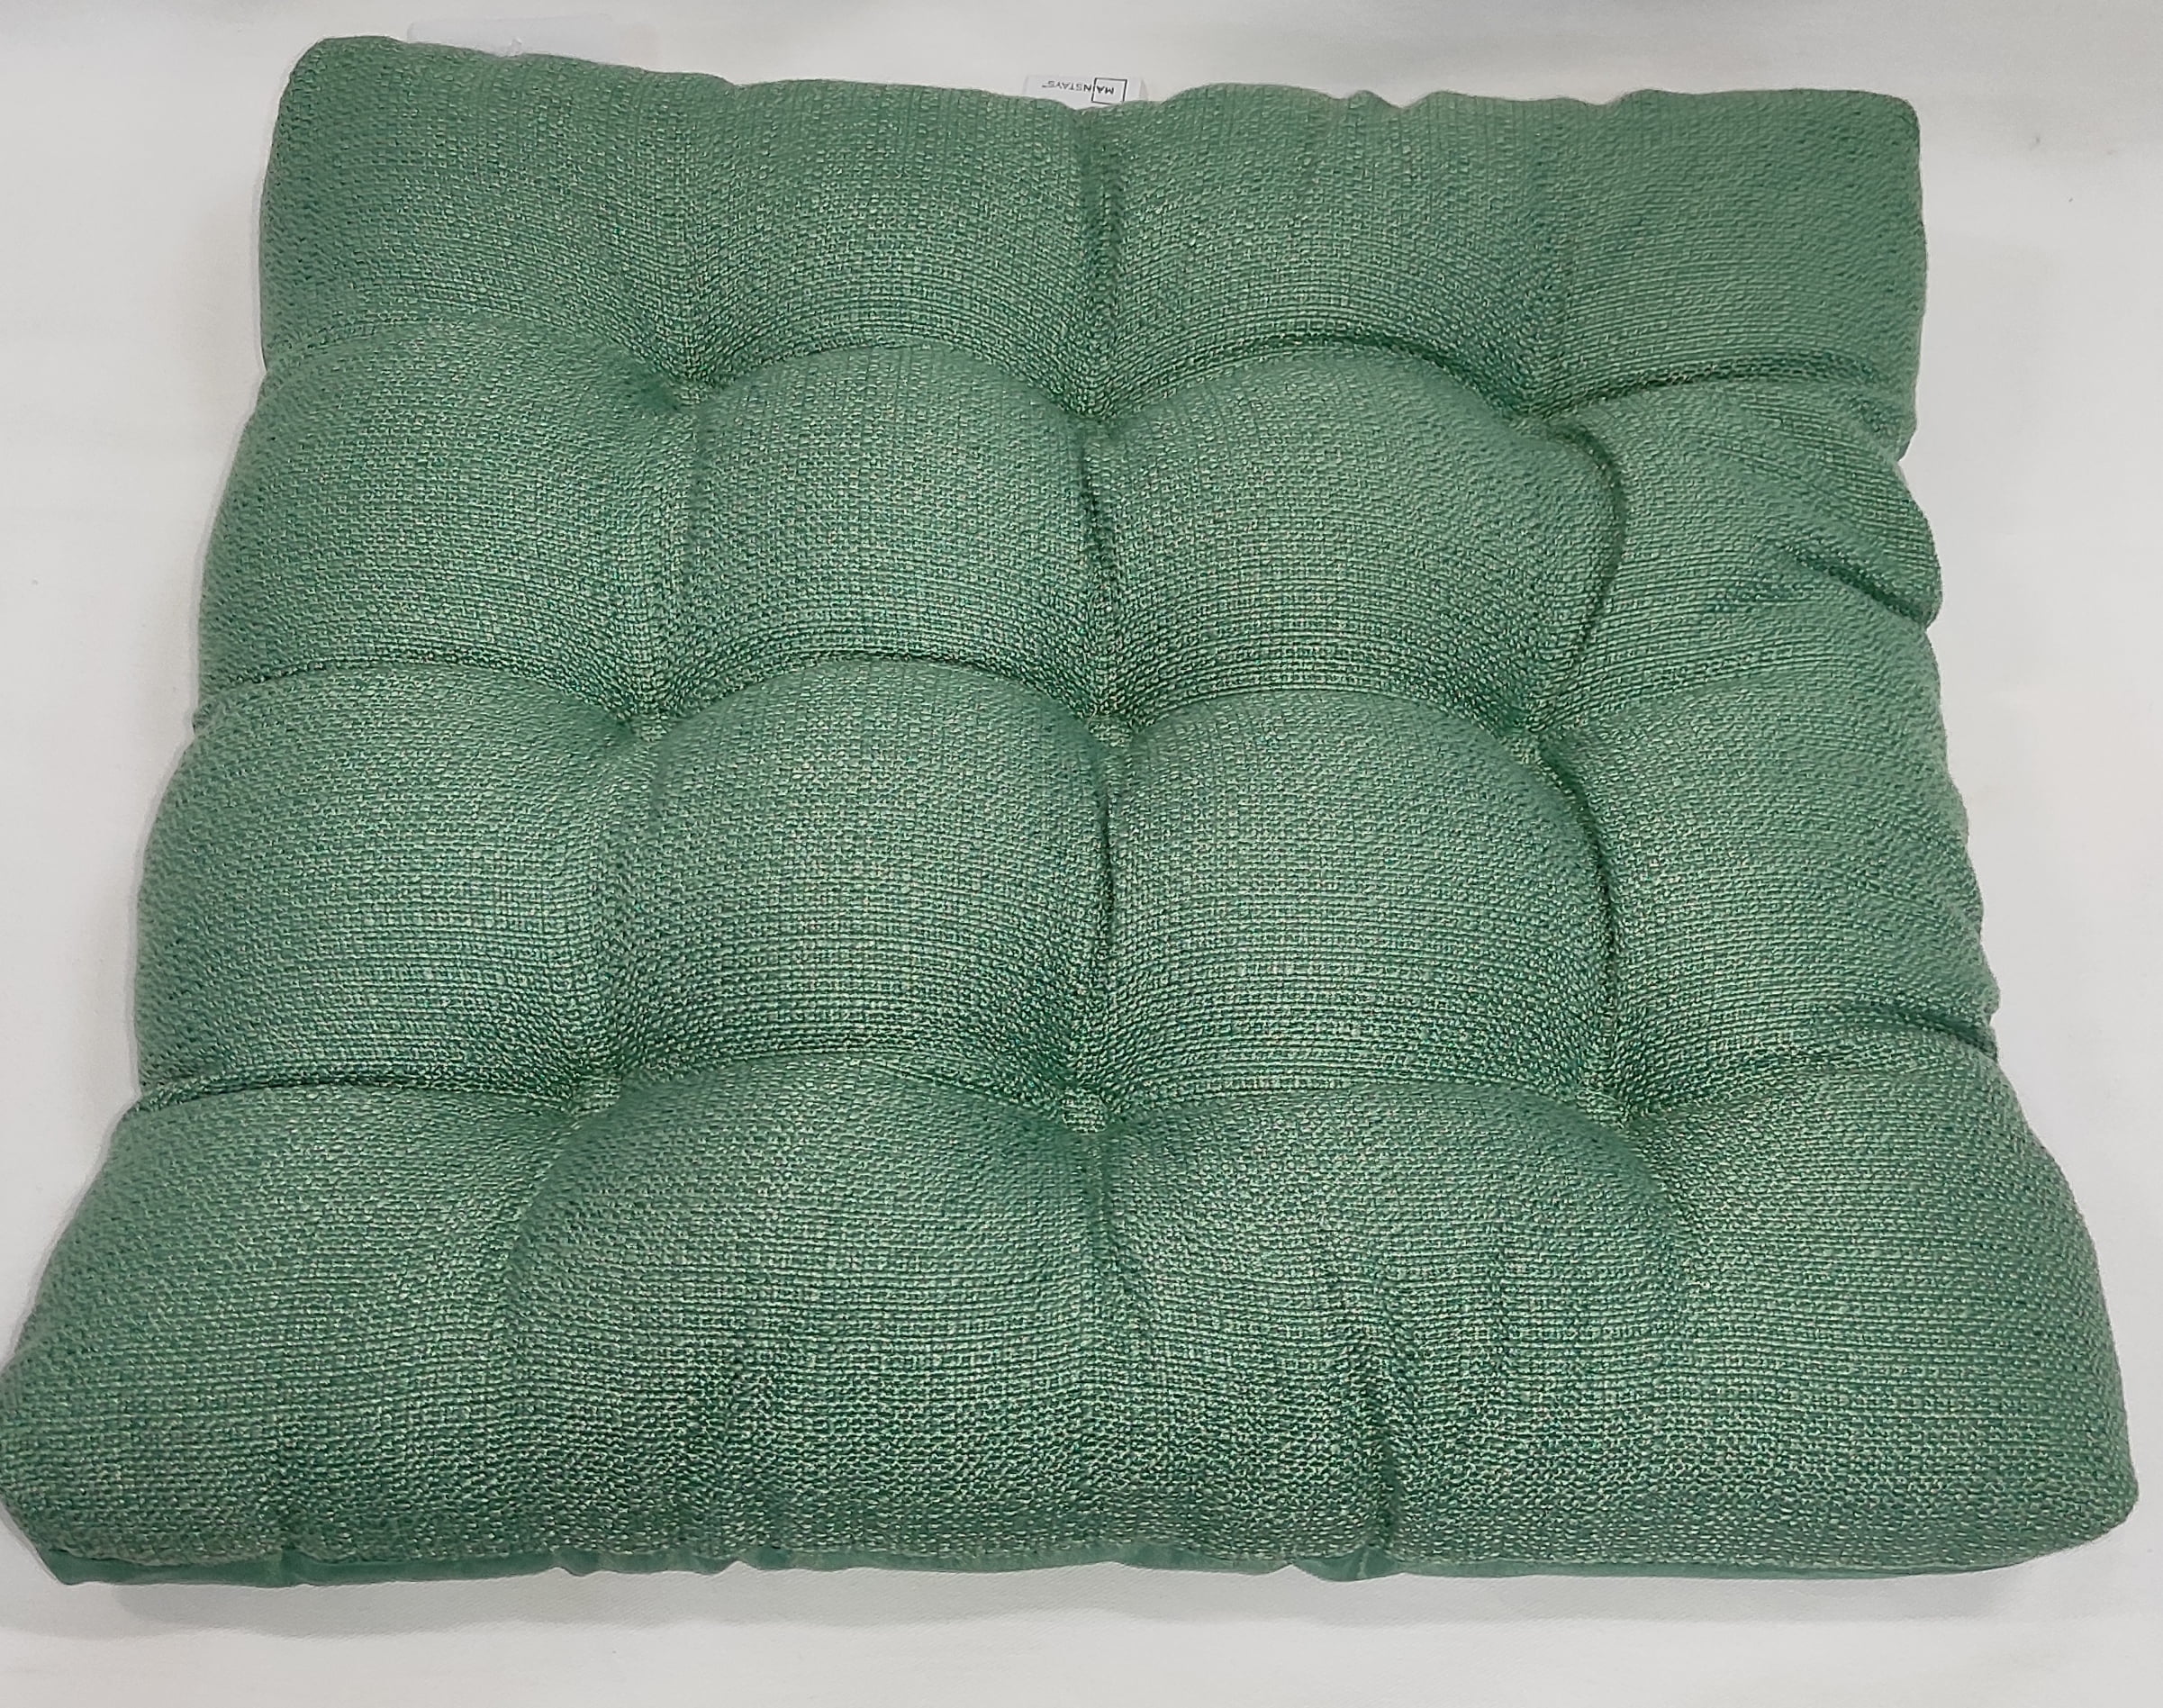 Timberlake 15.5 Square Chair Cushion in Sage Green (Set of 6)